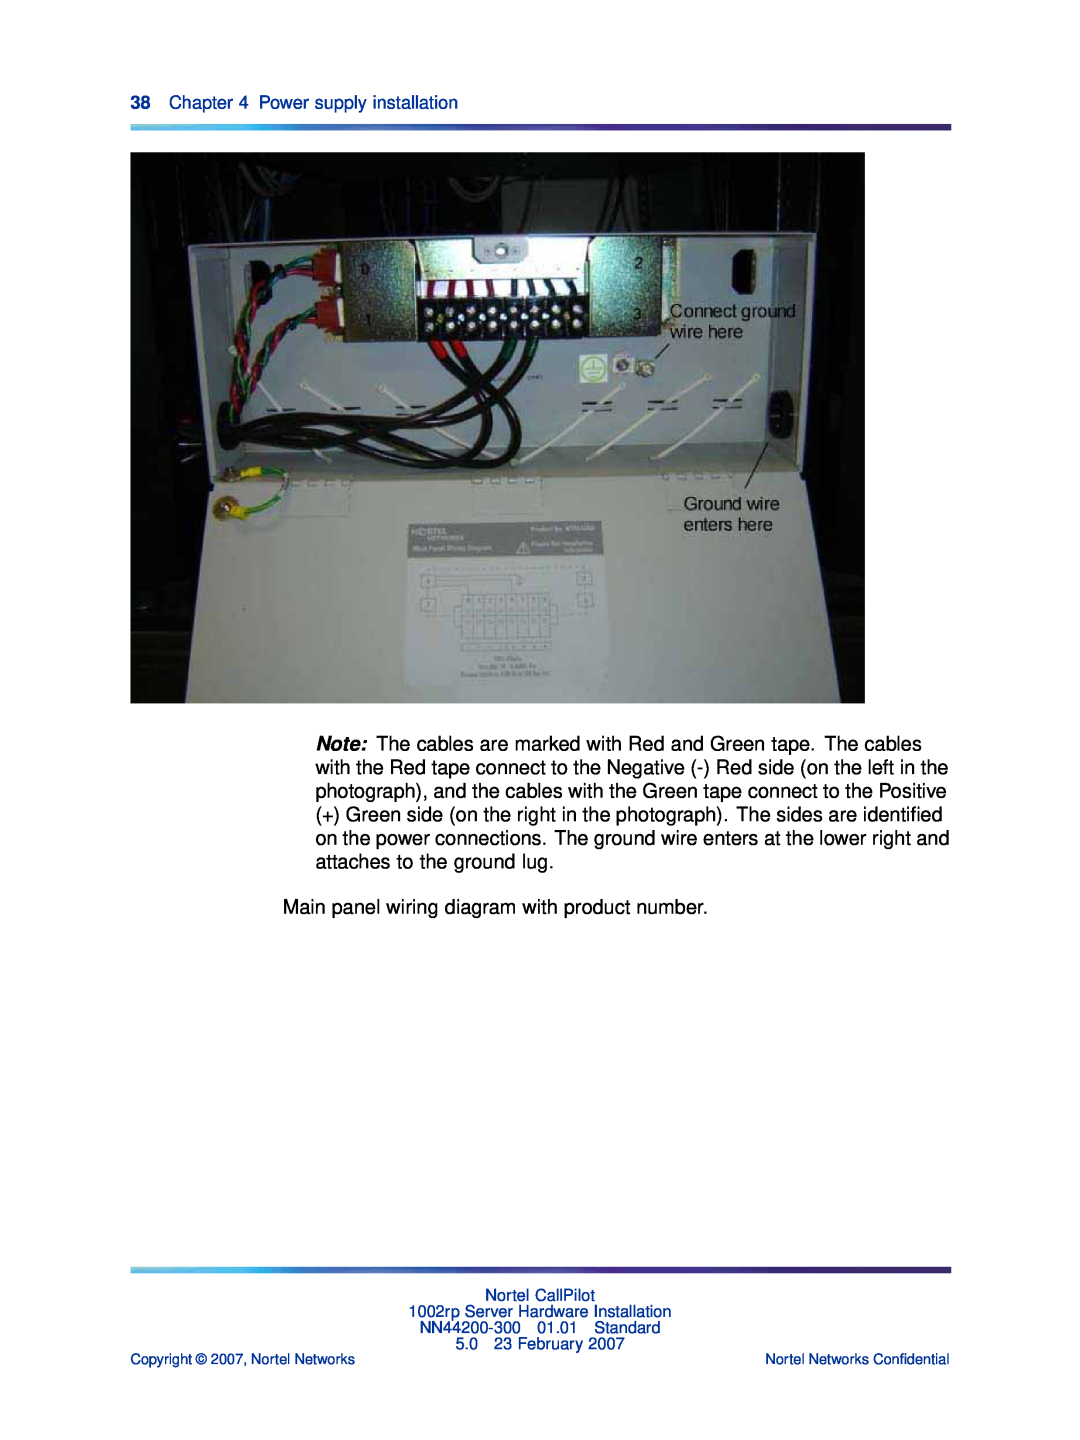 Nortel Networks NN44200-300 manual Main panel wiring diagram with product number 